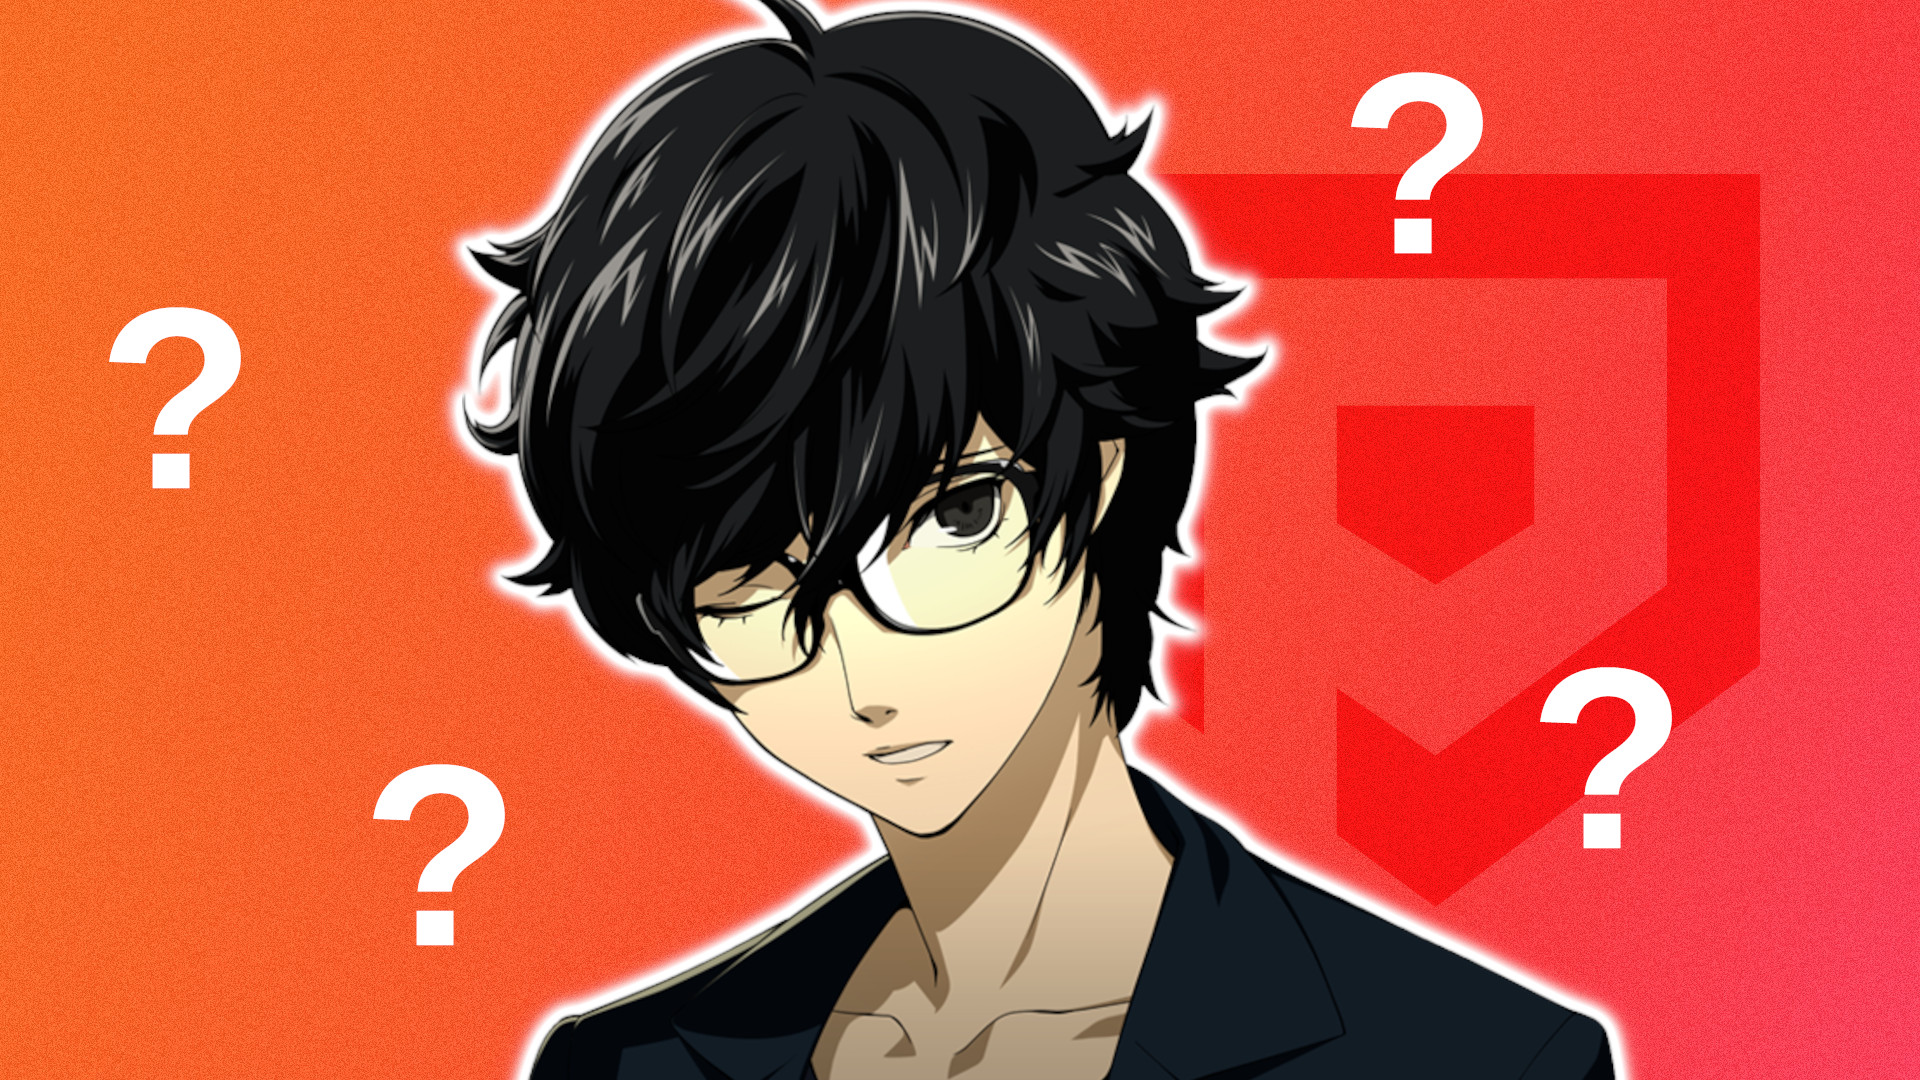 Persona 5 Royal: All Exam Answers